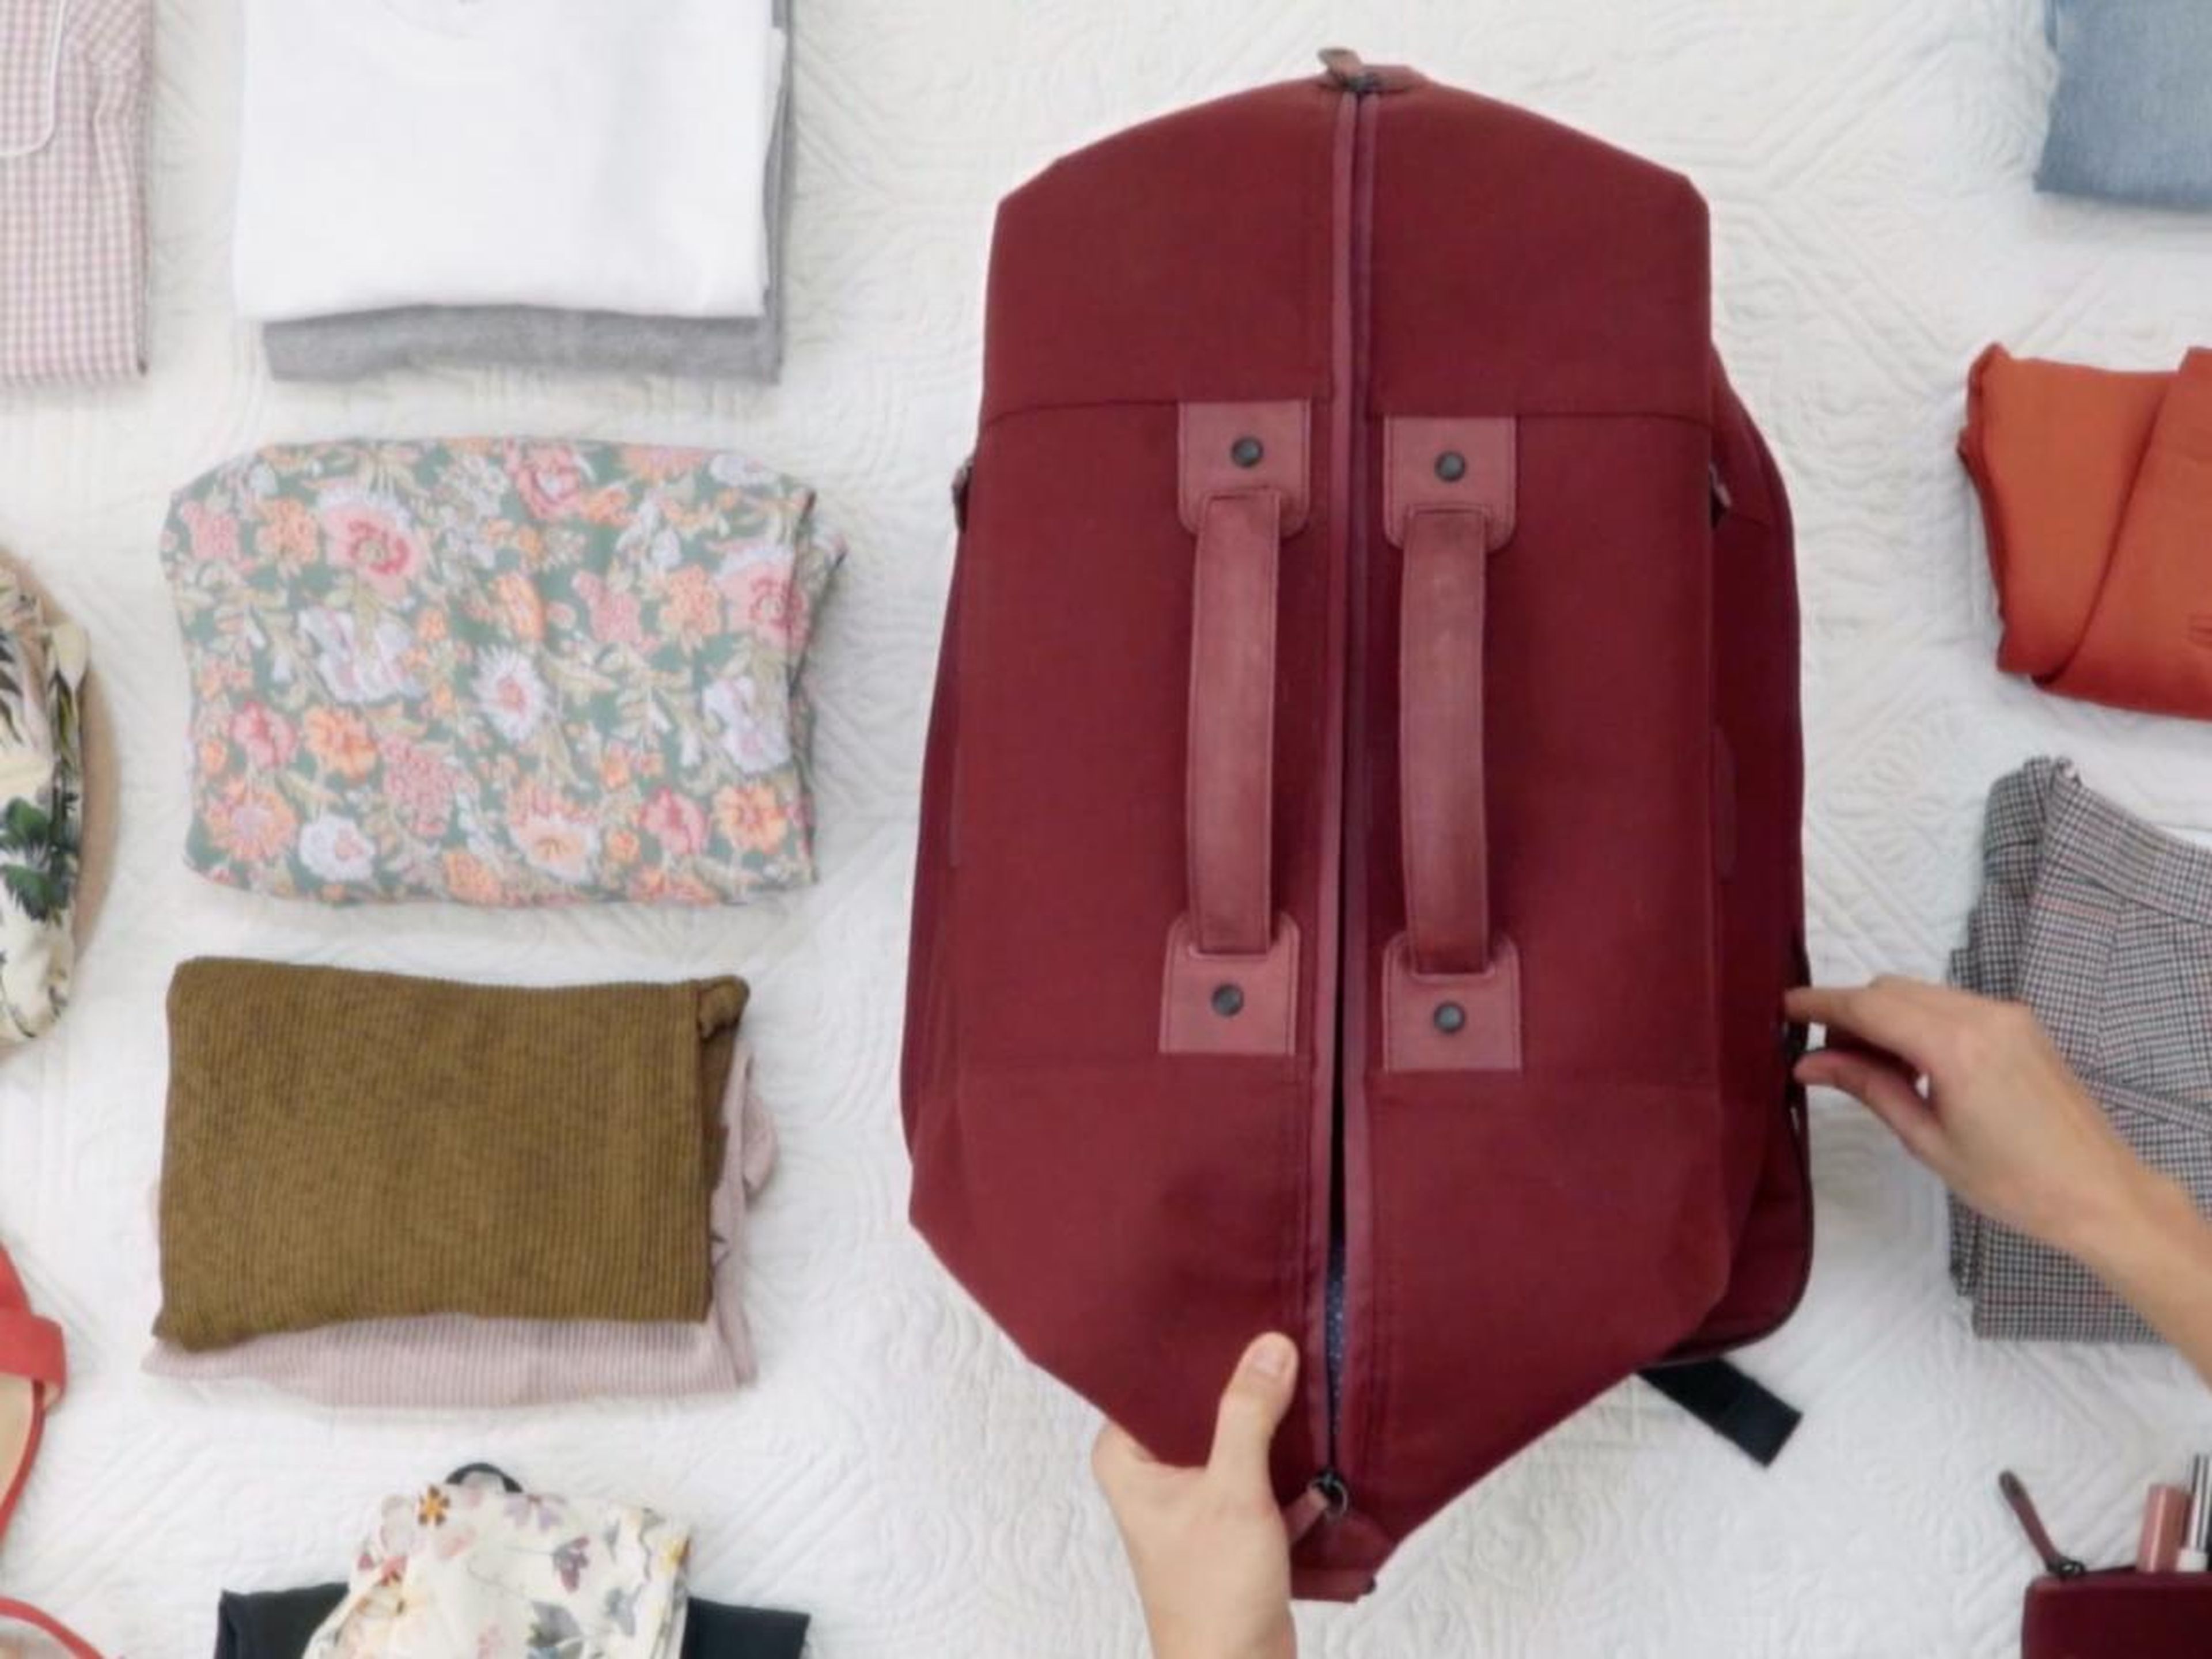 Most airlines' policies allow only one carry-on bag and one personal item. Wool & Oak's bag is designed to let travelers carry just one piece of luggage onto the plane. "I haven't been caught yet," Webster said.